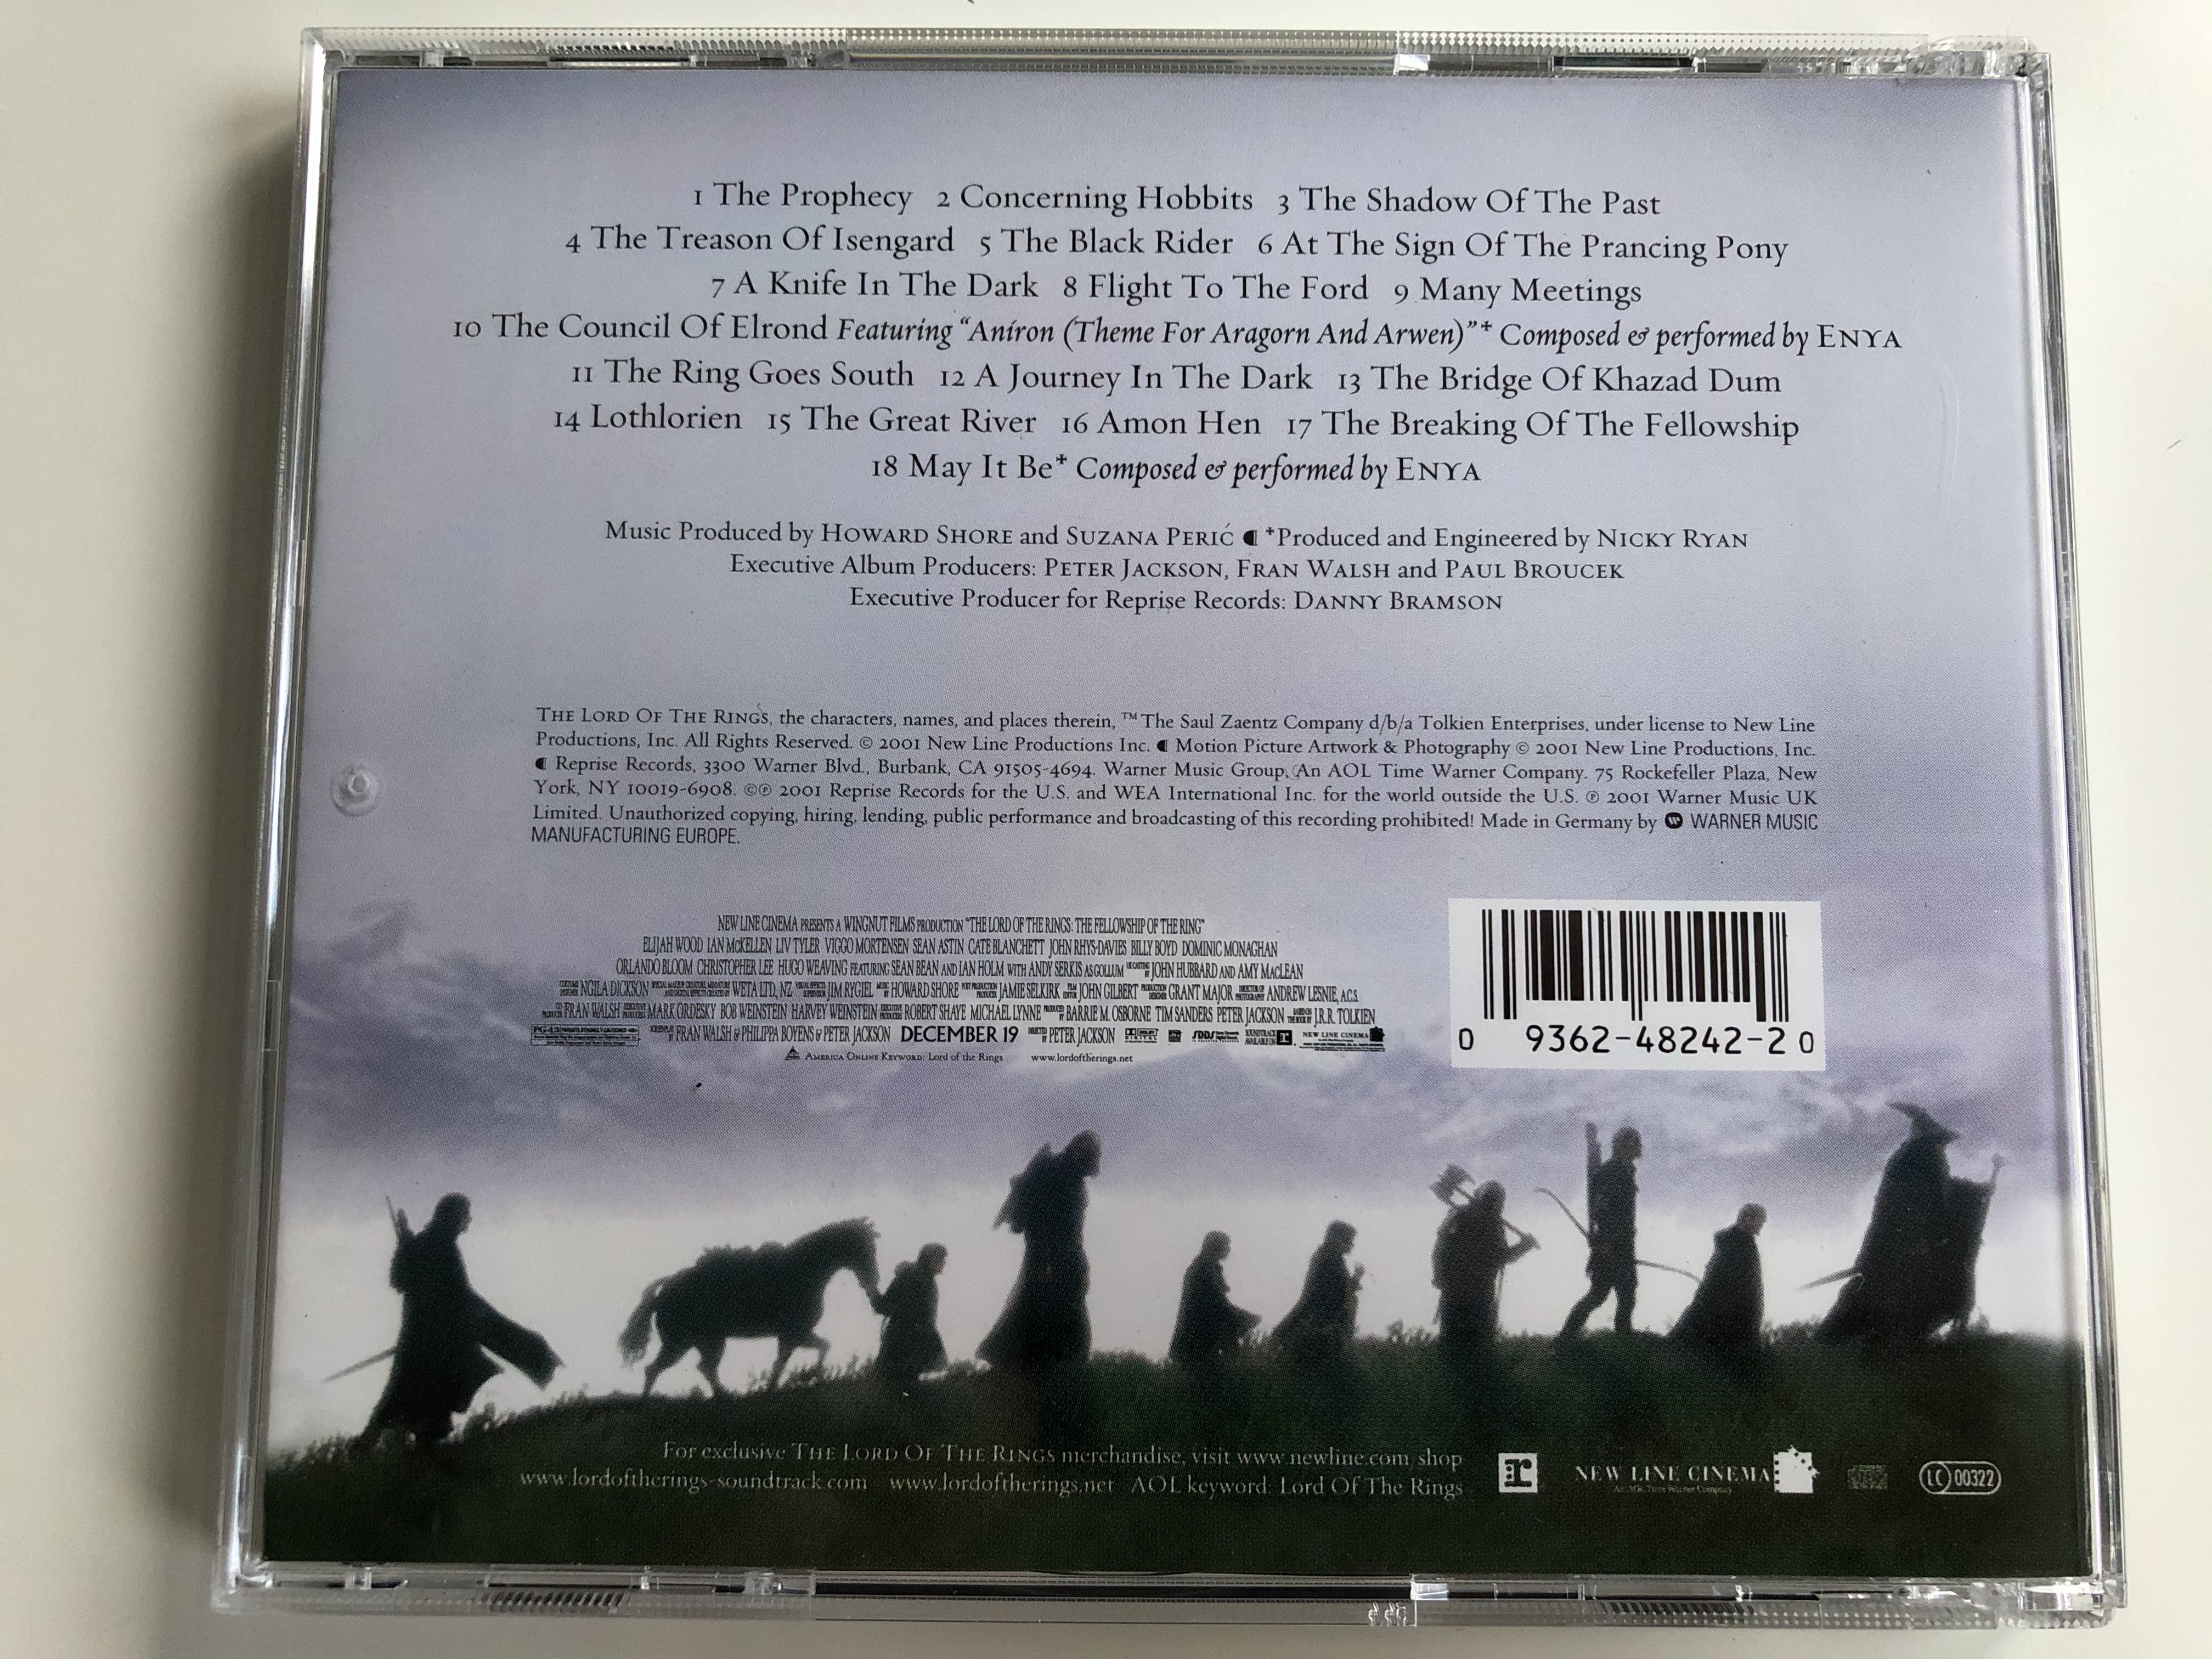 the-lord-of-the-rings-the-fellowship-of-the-ring-original-motion-picture-soundtrack-music-composed-orchestrated-and-conducted-by-howard-shore-reprise-records-audio-cd-2001-9362-48242-2-1-7-.jpg